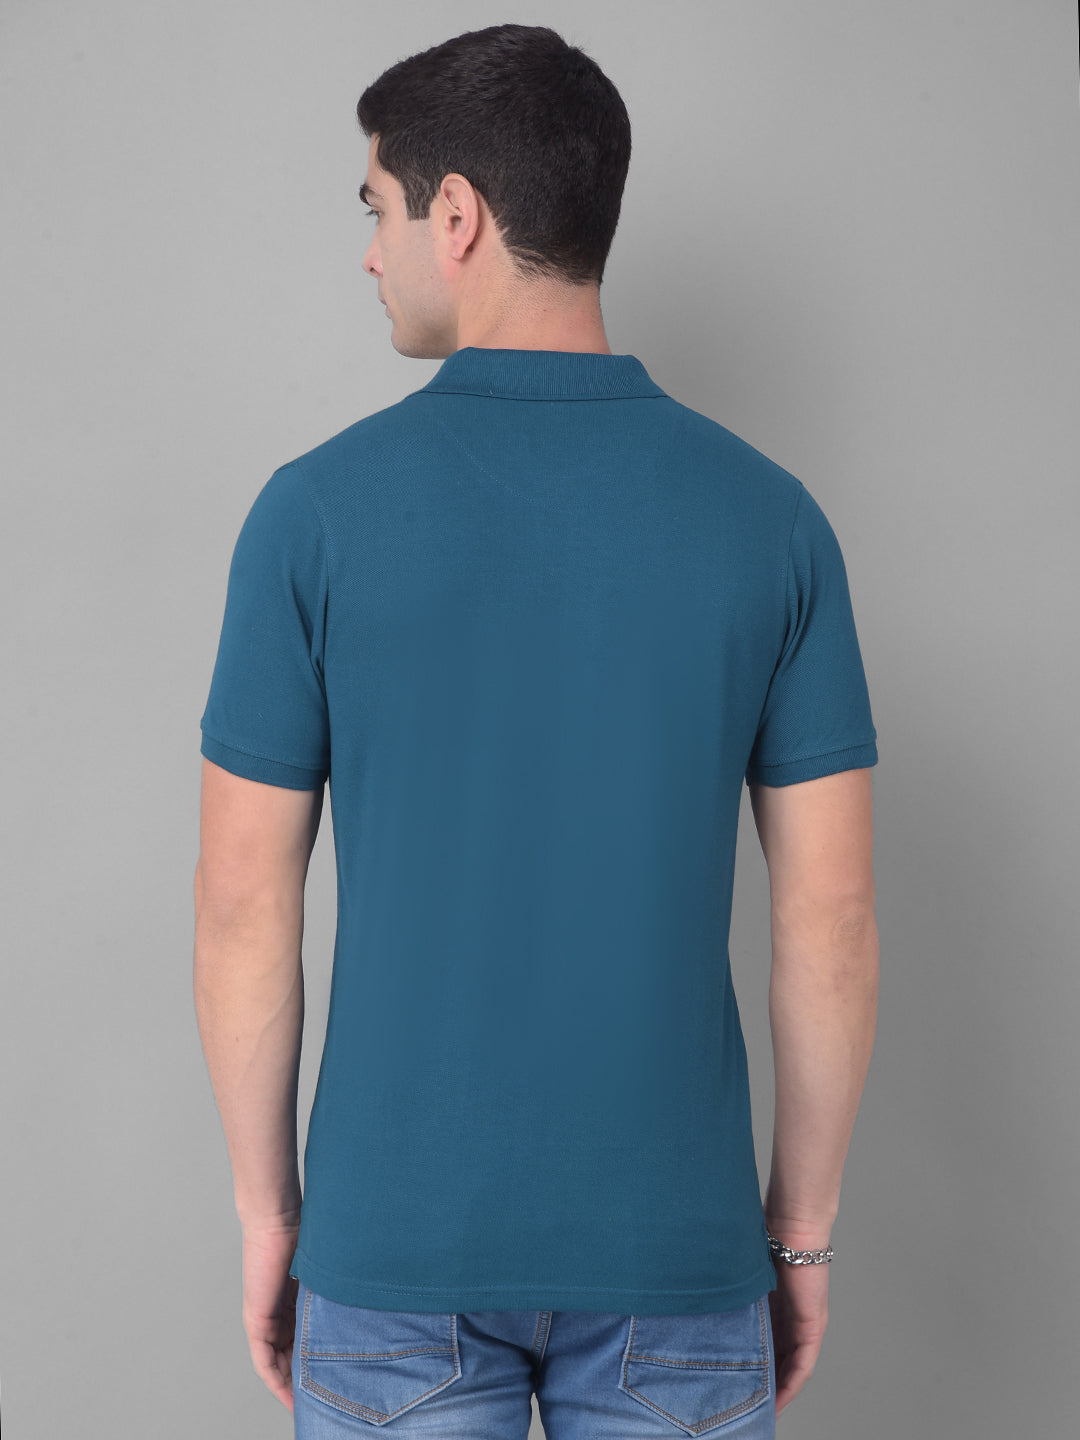 cobb solid crystal teal polo neck t-shirt